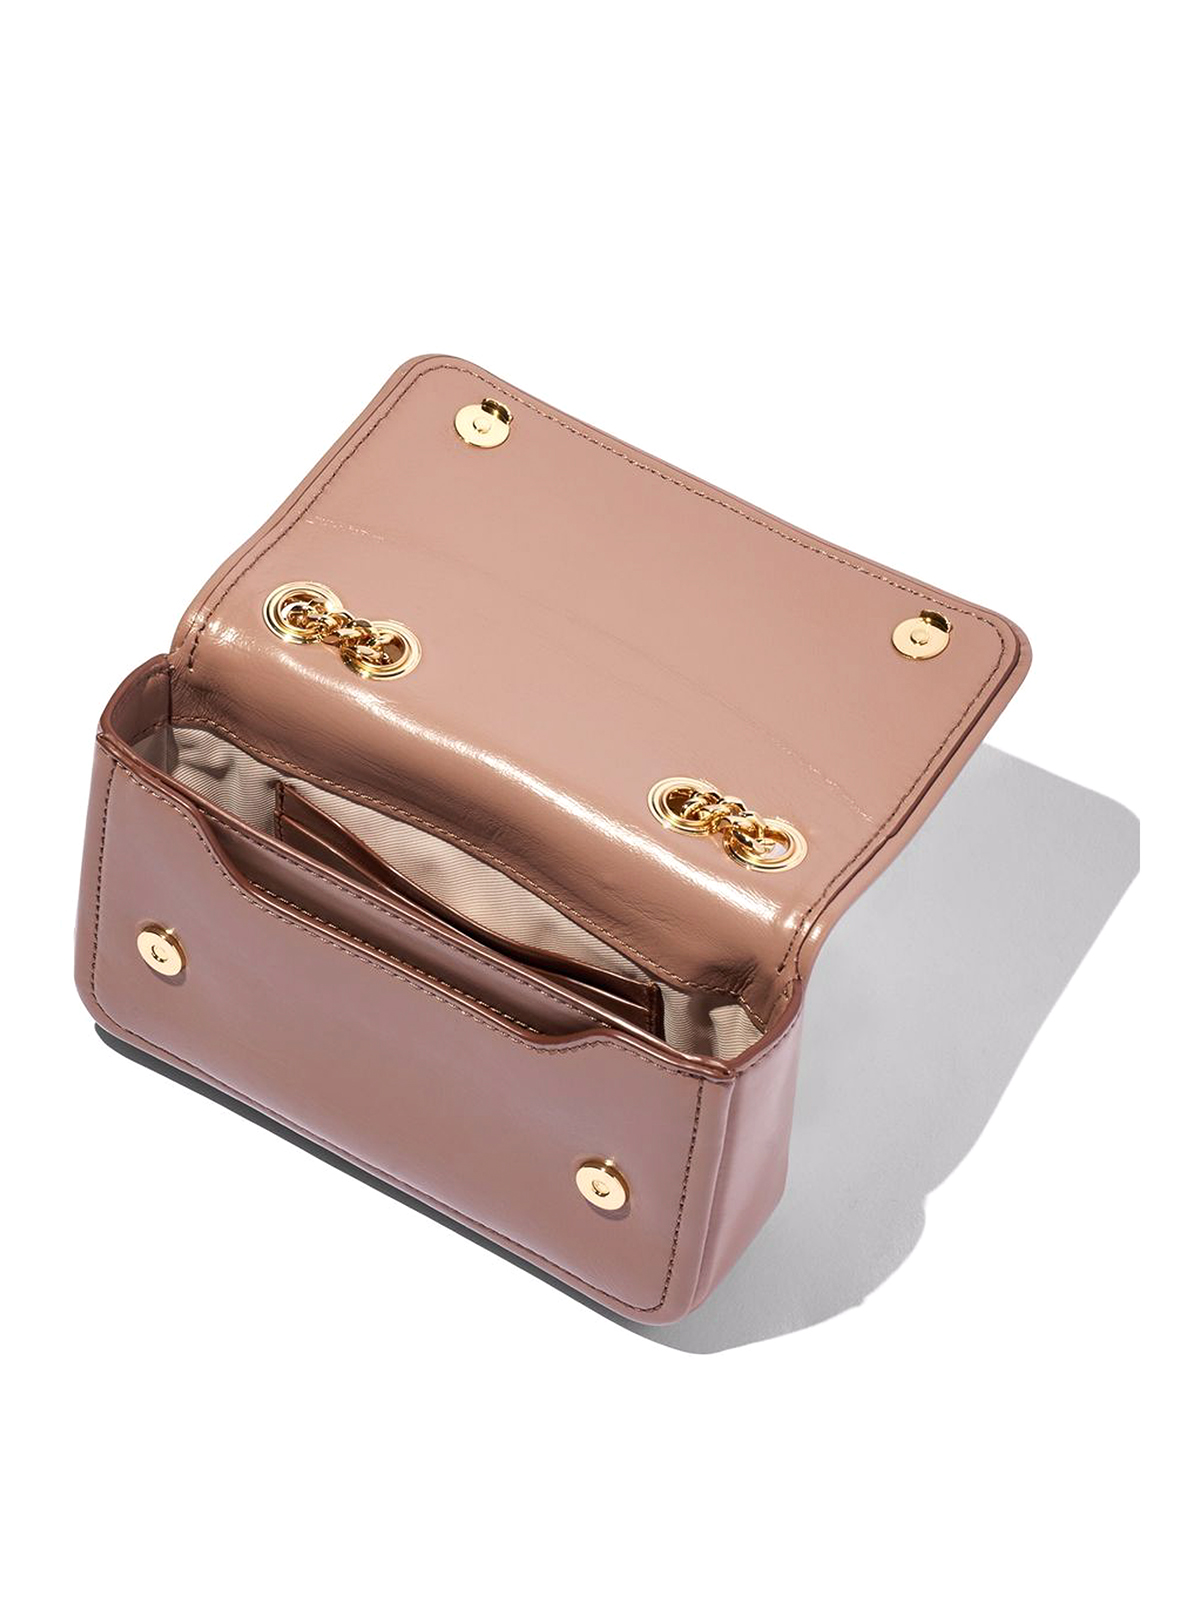 Marc Jacobs The Glam Shot Mini Bag in Pink